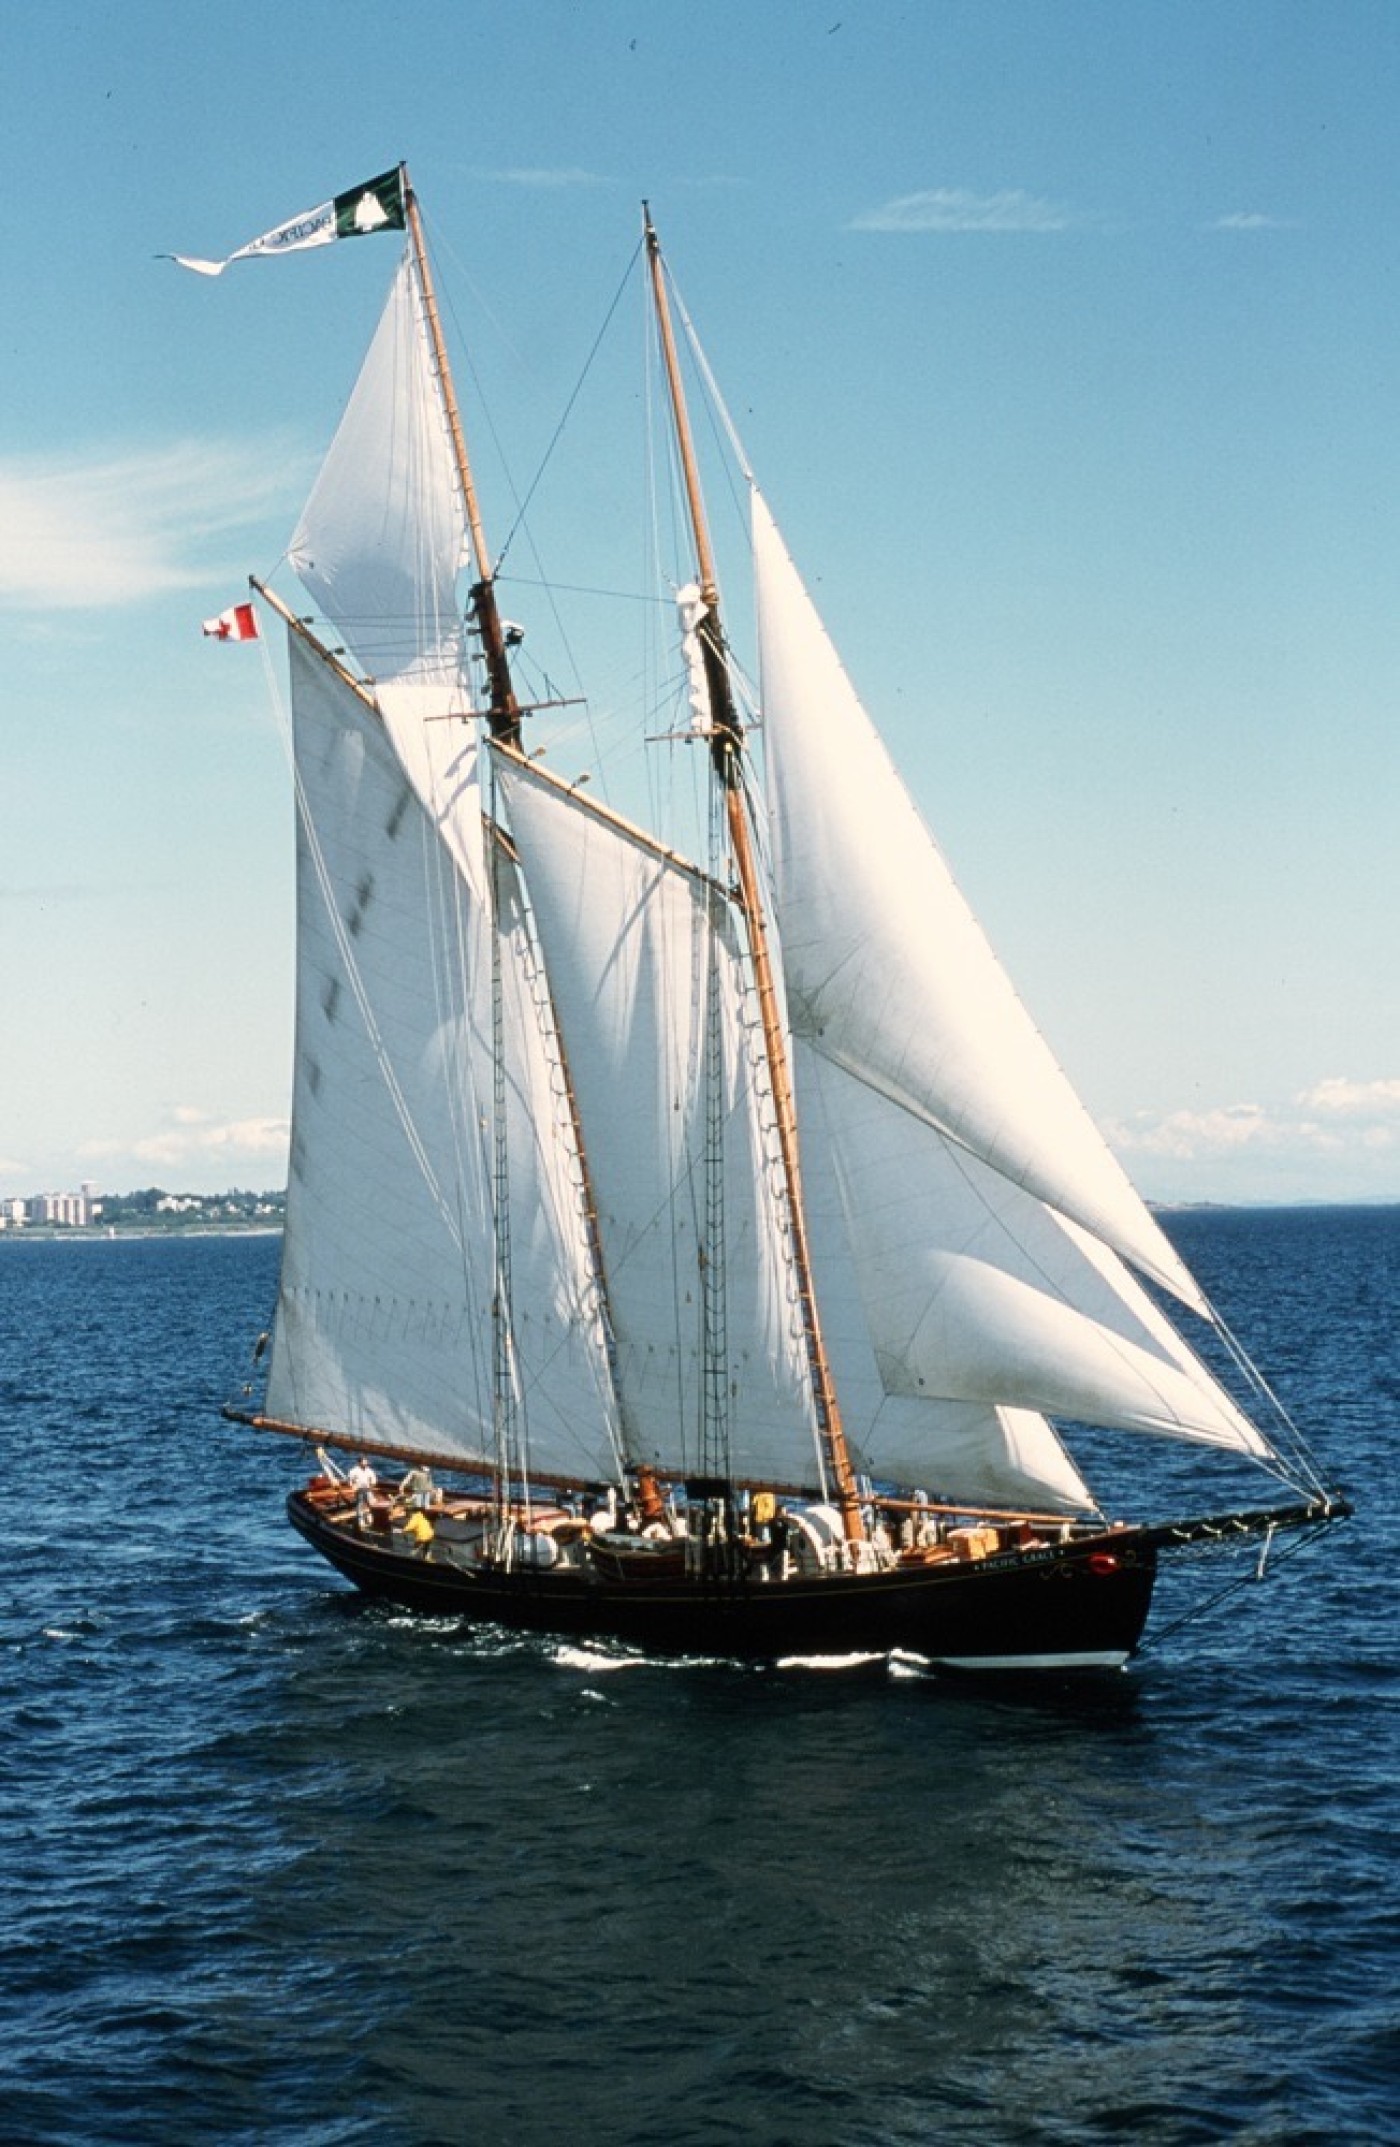 Pacific Grace and Pacific Swift